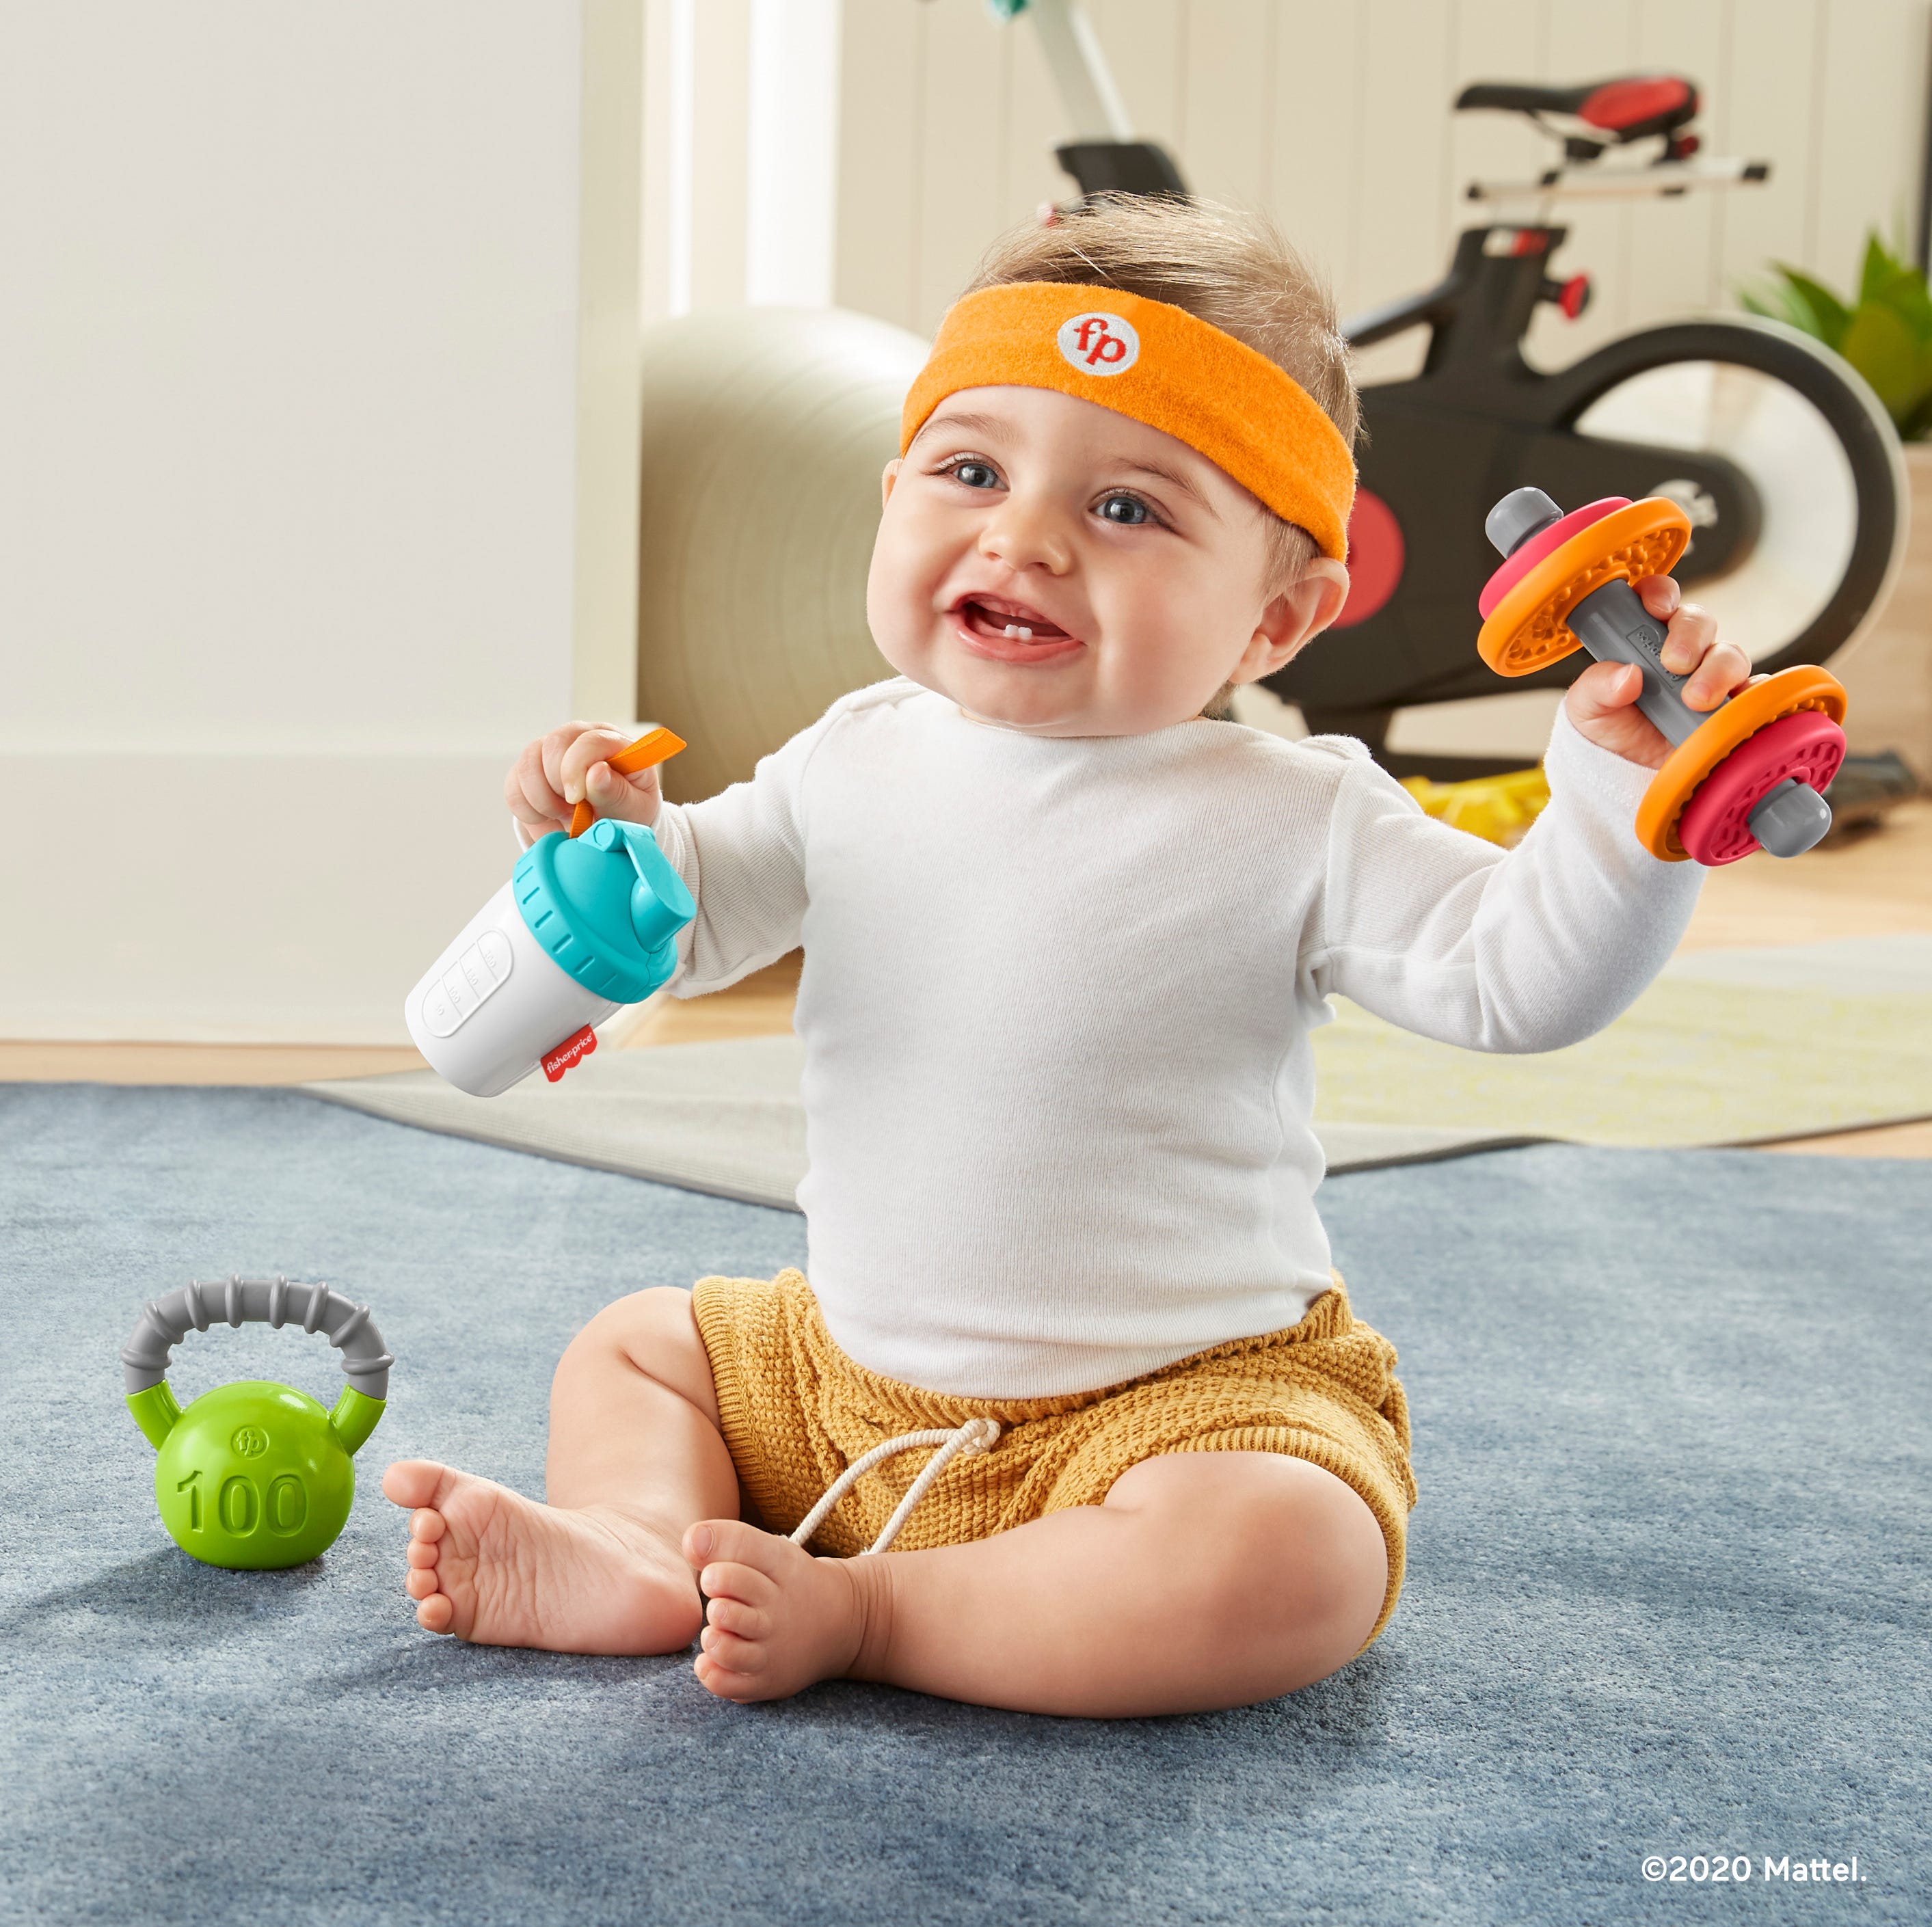 Oxide salto Hol Fisher-Price toys: COVID-19 inspires new line of baby and toddler toys